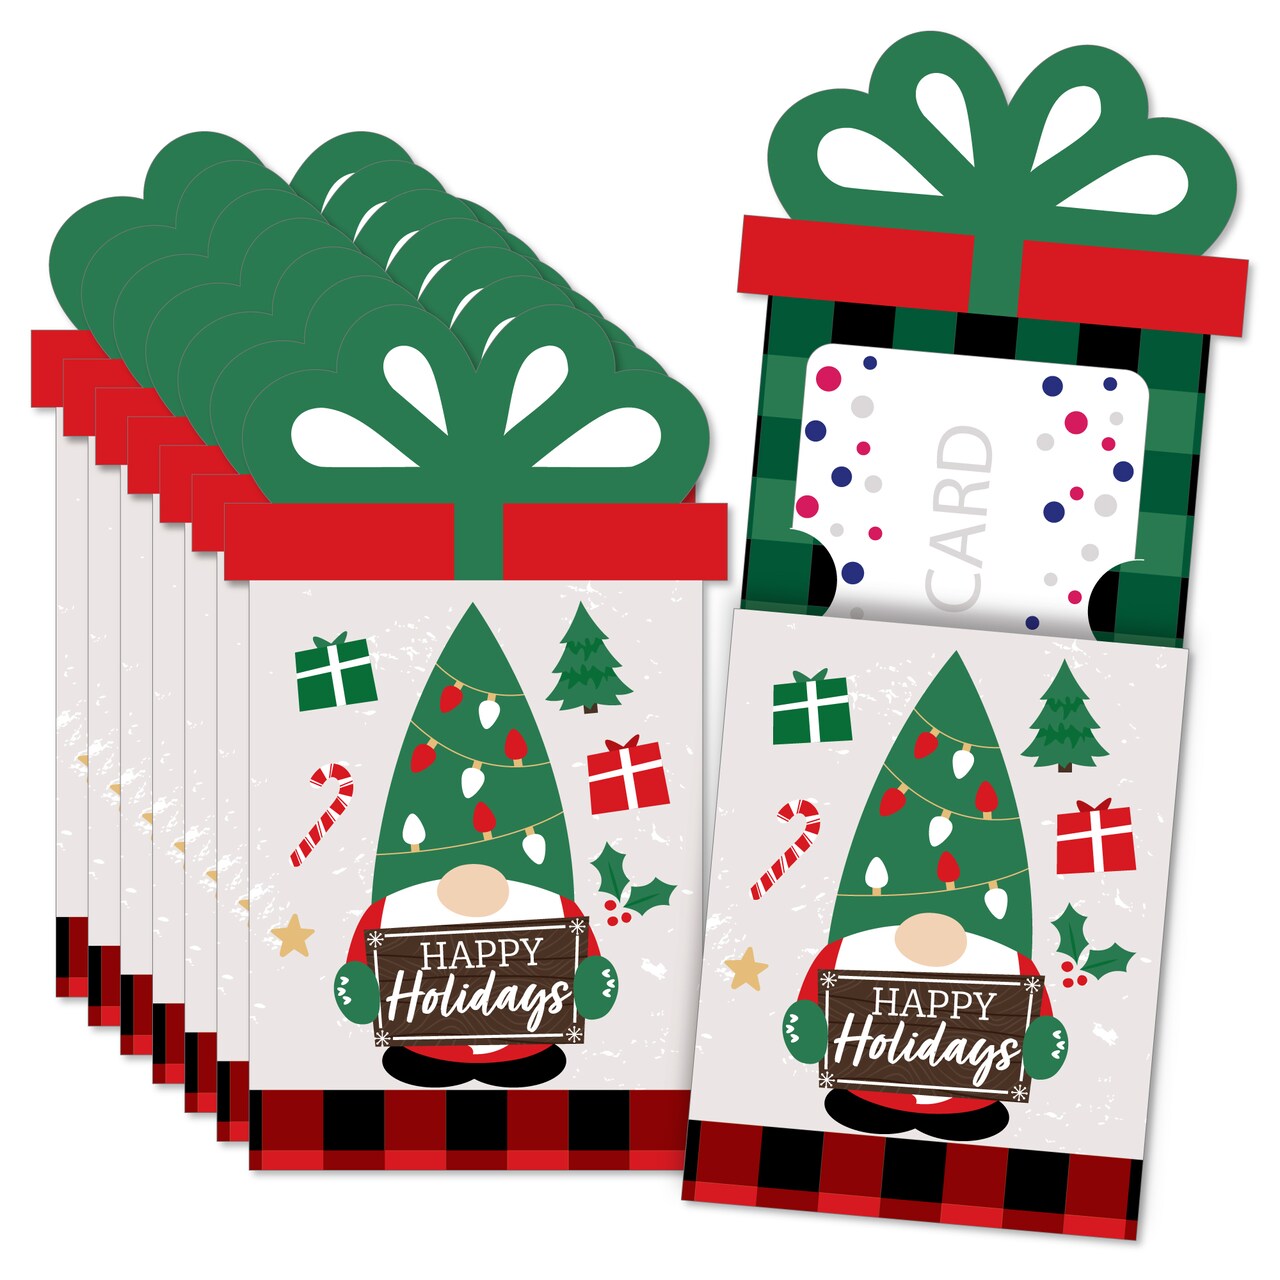 Big Dot of Happiness Red and Green Holiday Gnomes - Christmas Party Money and Gift Card Sleeves - Nifty Gifty Card Holders - Set of 8